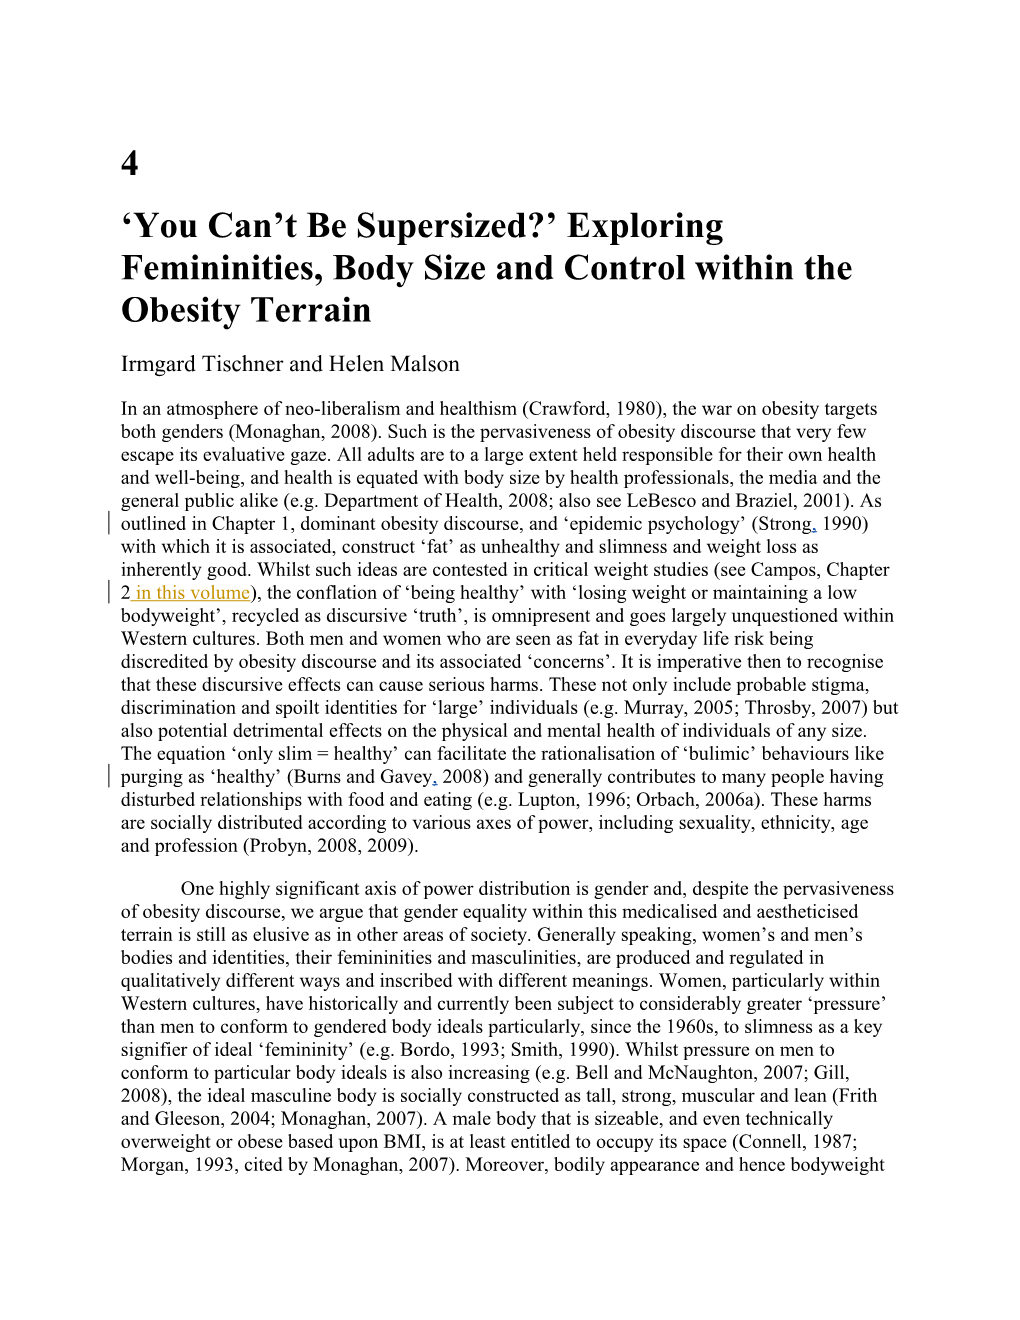 You Can T Be Supersized? Exploring Femininities, Body Size and Control Within the Obesity